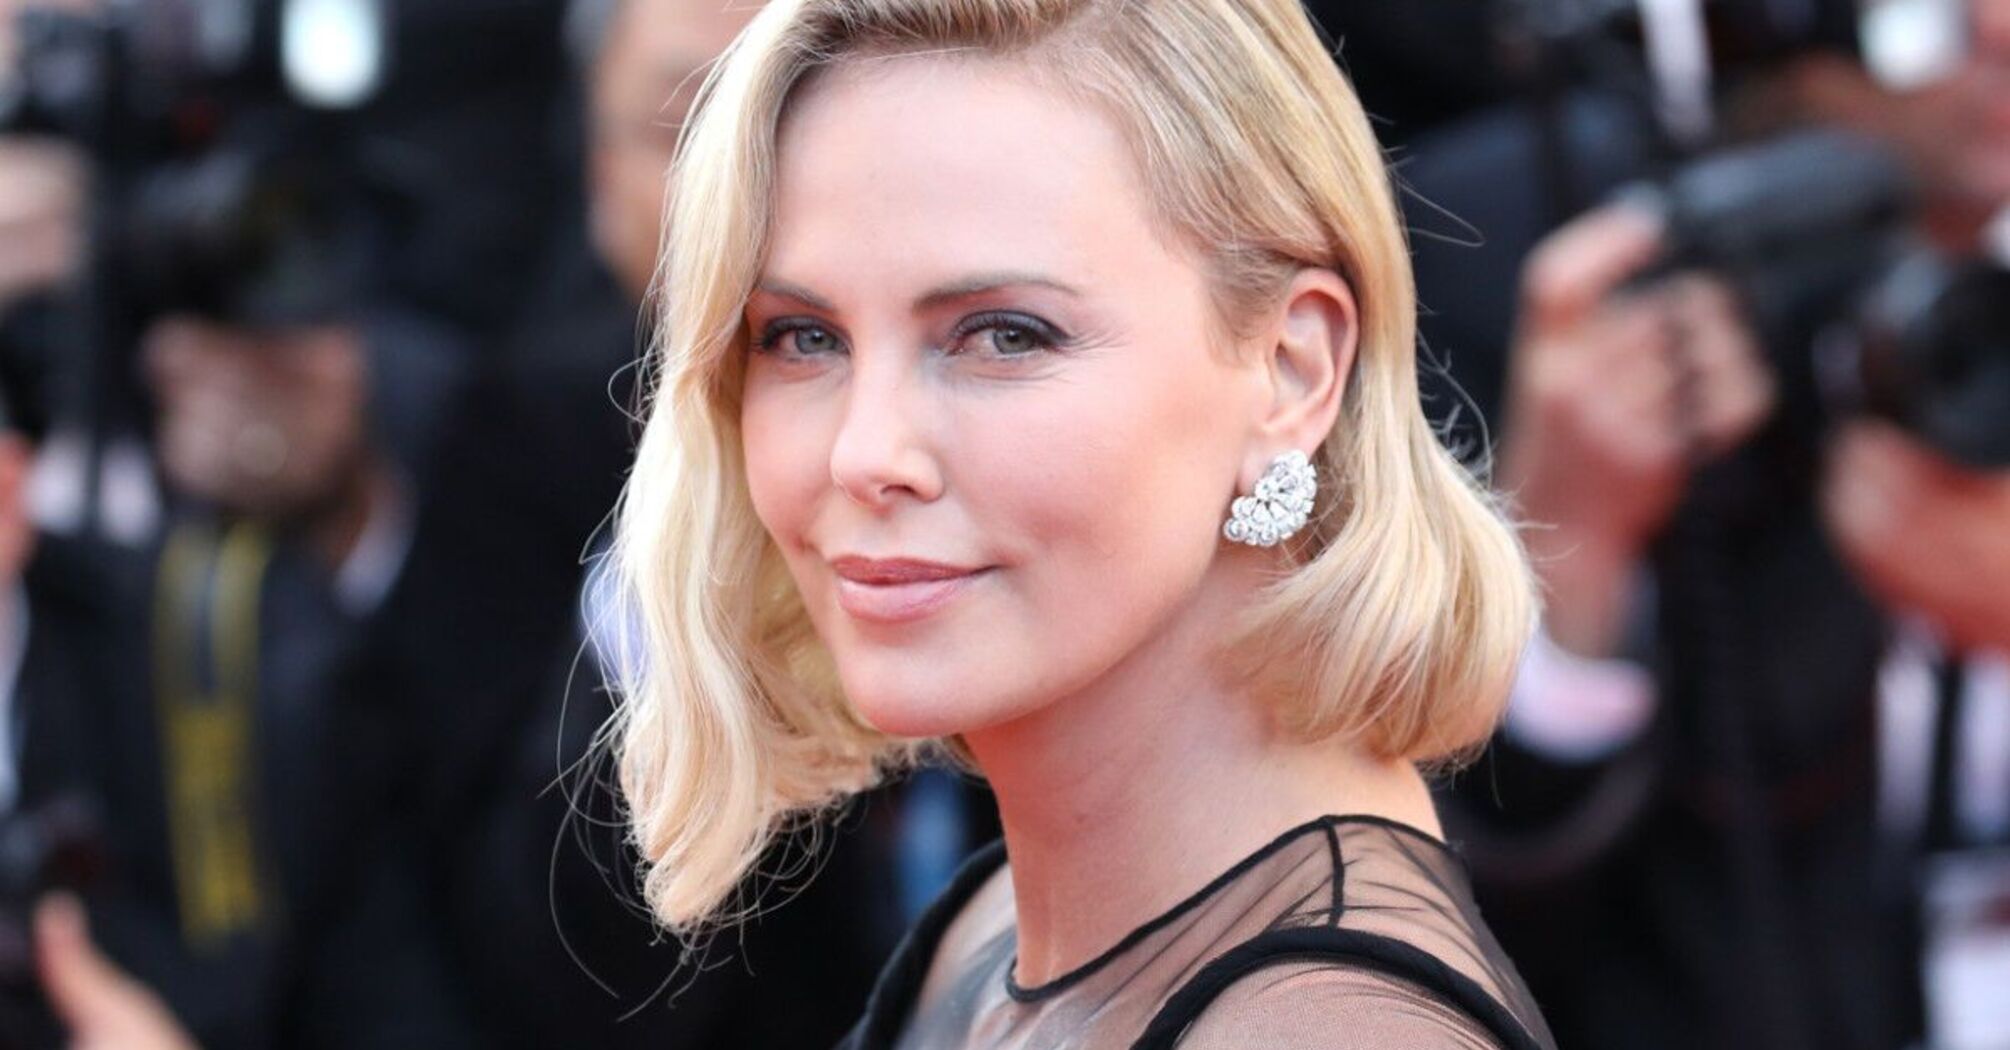 5 things you didn’t know about Charlize Theron